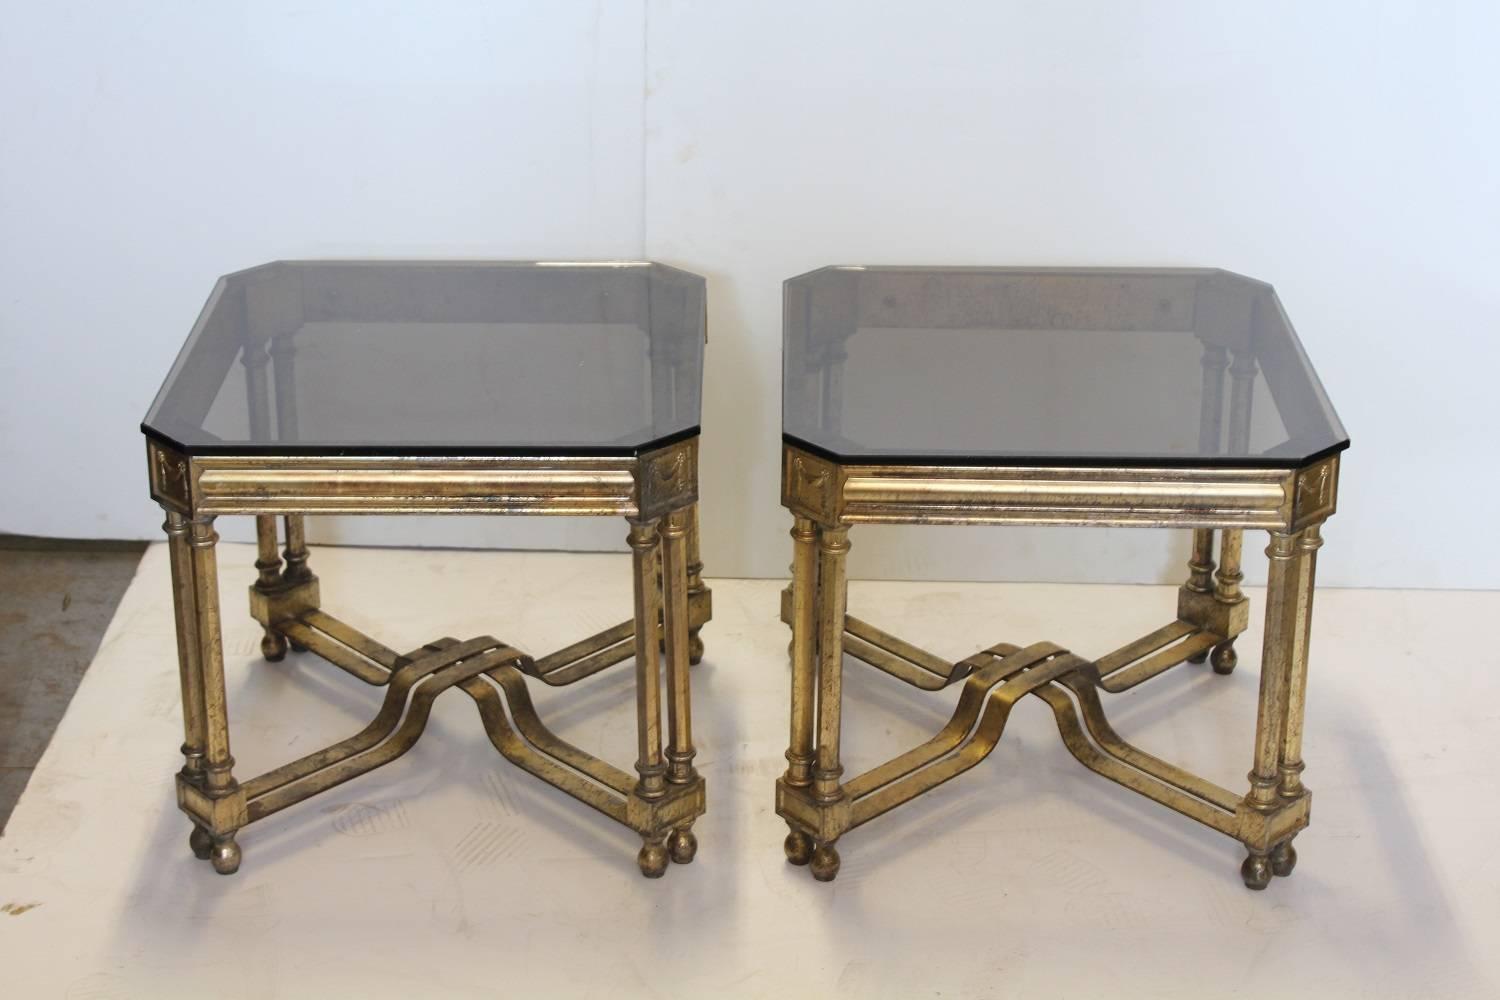 1930s French Maison Jansen style silver leaf accent or side tables with smoked glass tops.